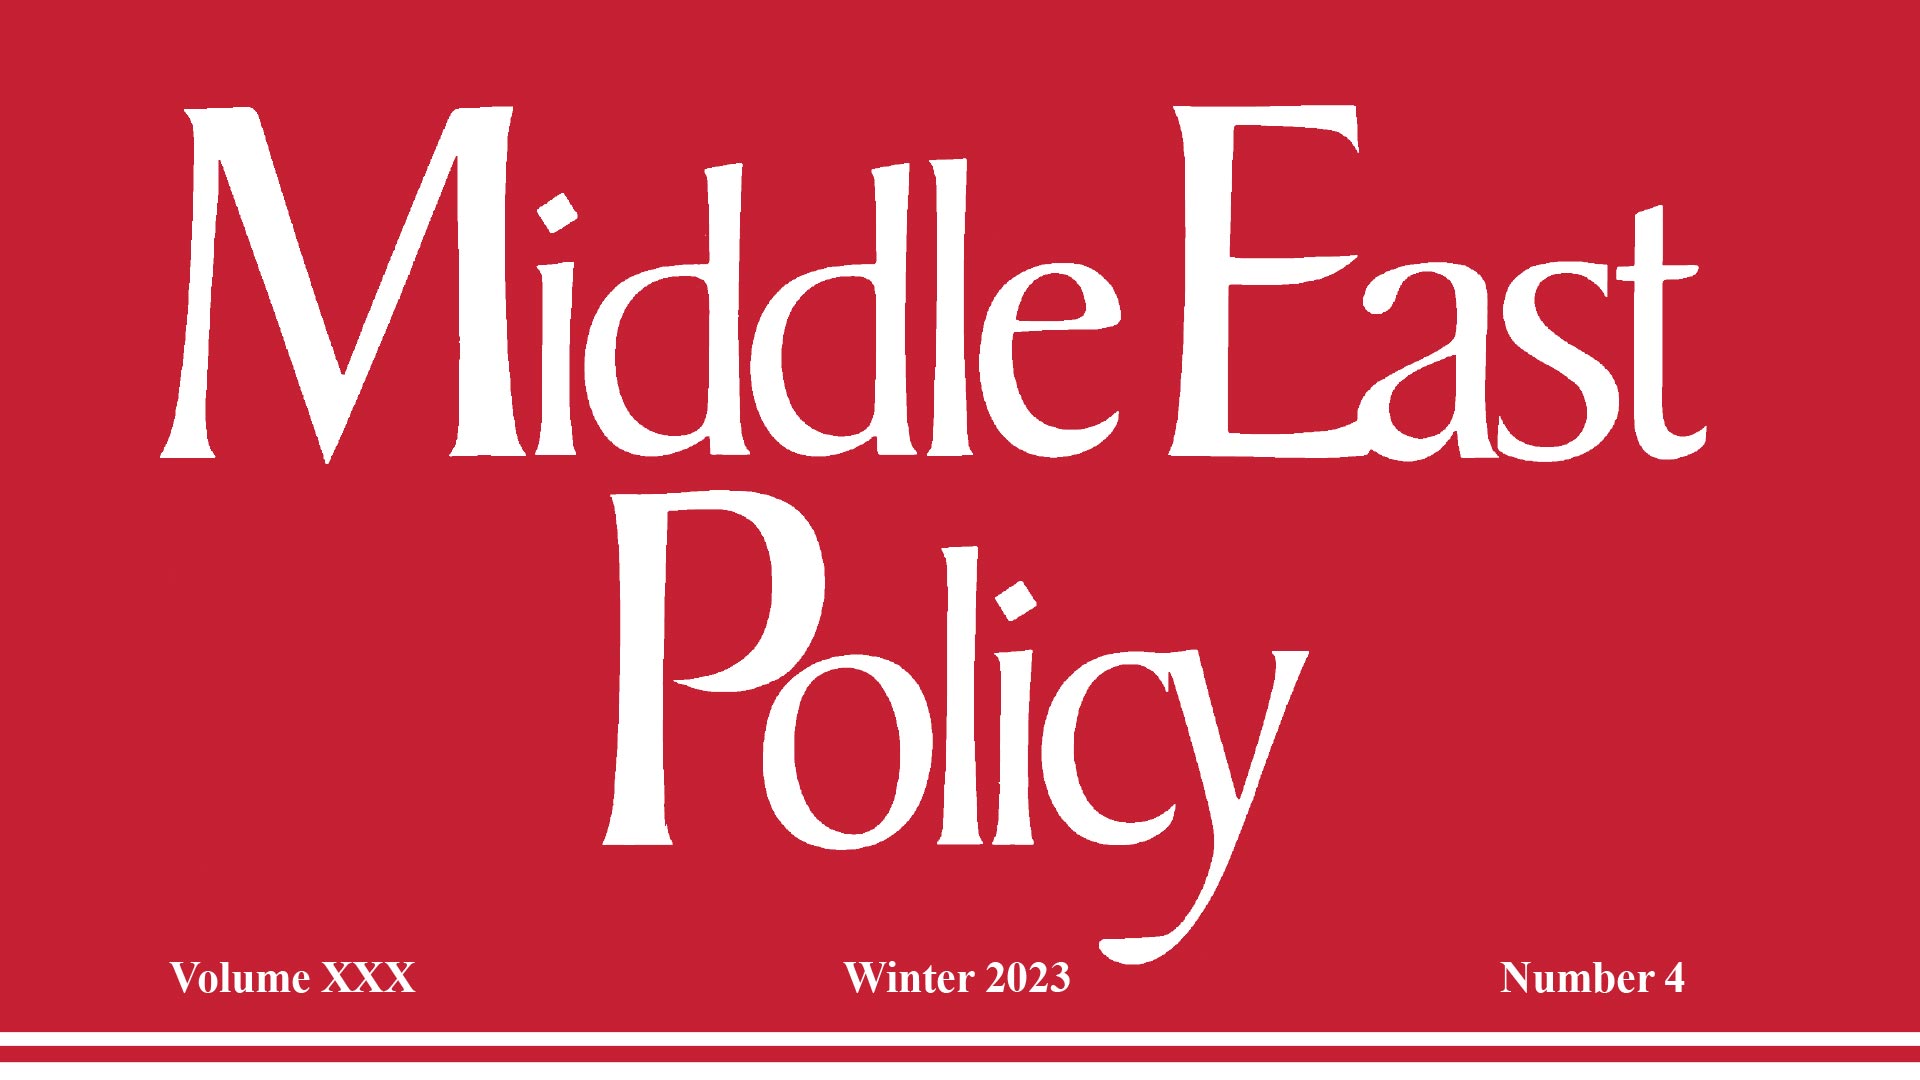 Middle East Policy's Winter 2023 Issue Is Now Available